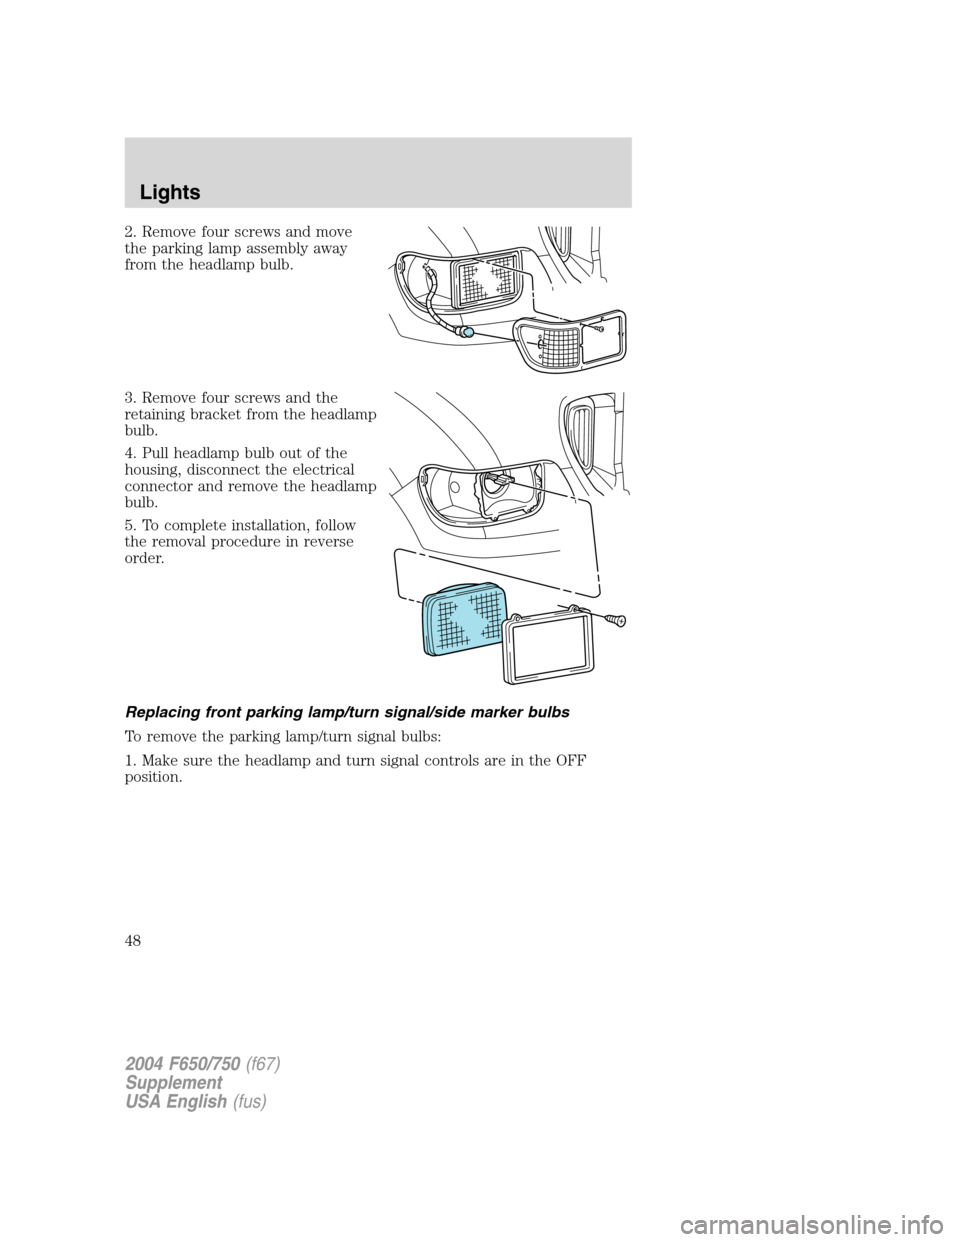 FORD F650 2004 11.G Service Manual 2. Remove four screws and move
the parking lamp assembly away
from the headlamp bulb.
3. Remove four screws and the
retaining bracket from the headlamp
bulb.
4. Pull headlamp bulb out of the
housing, 